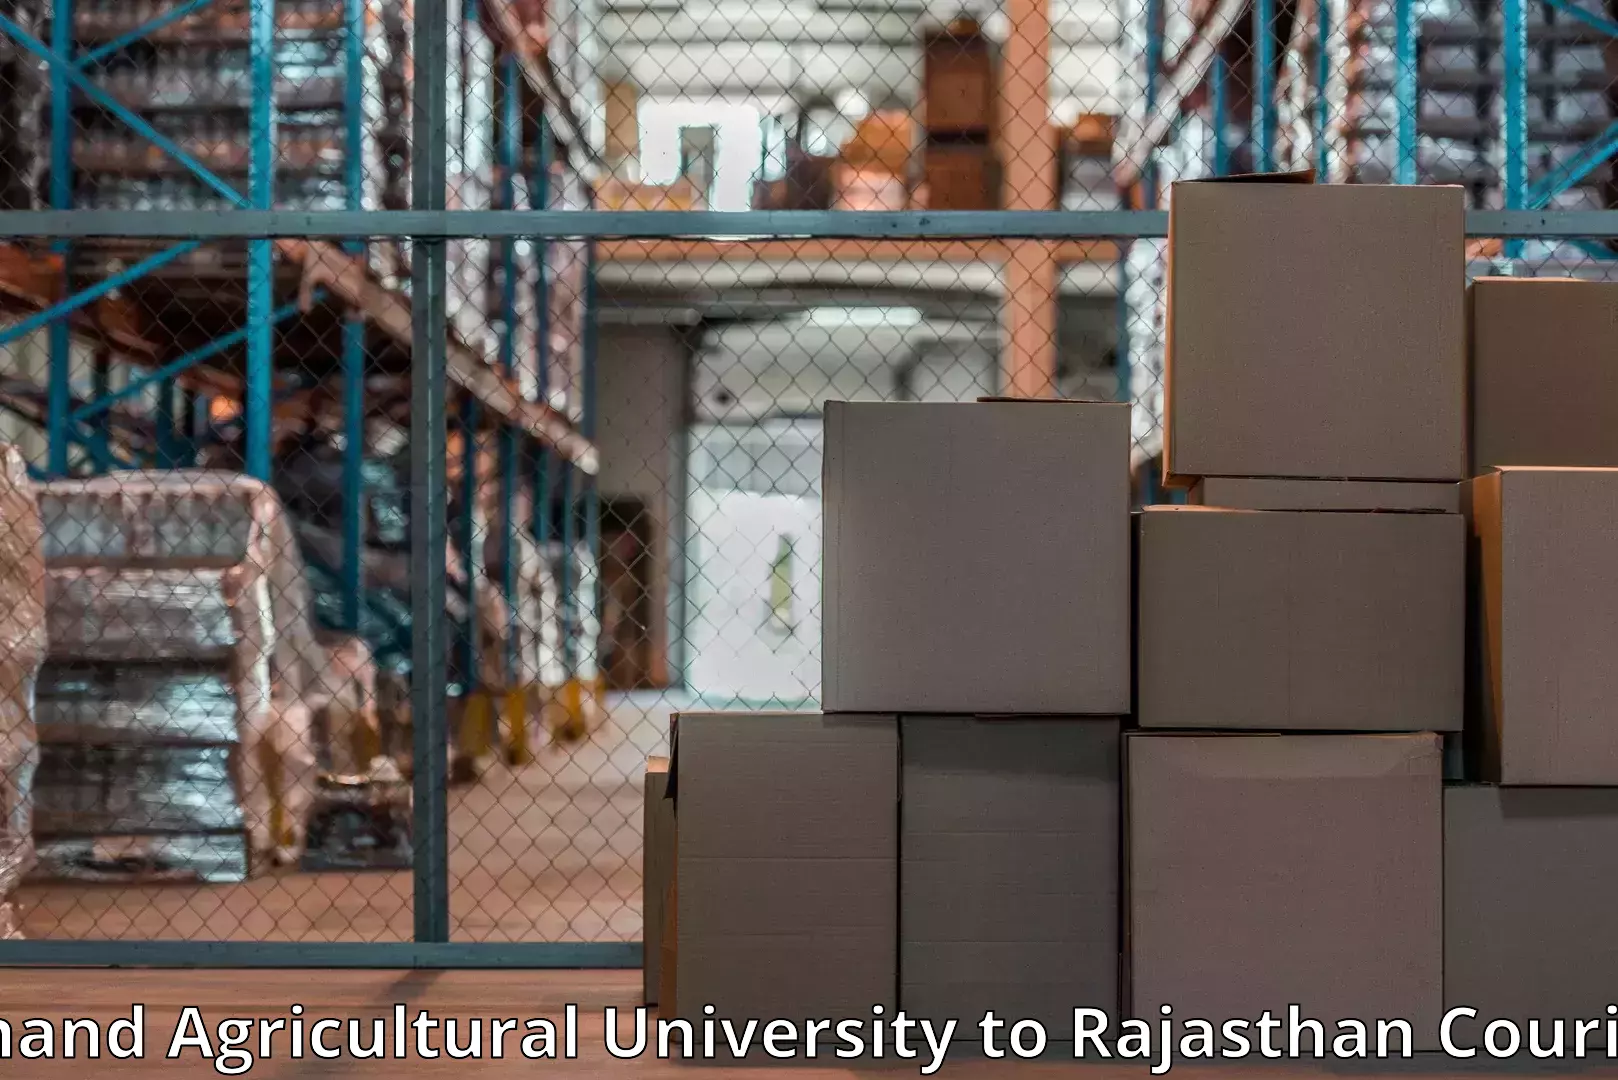 Trusted moving company in Anand Agricultural University to Abu Road